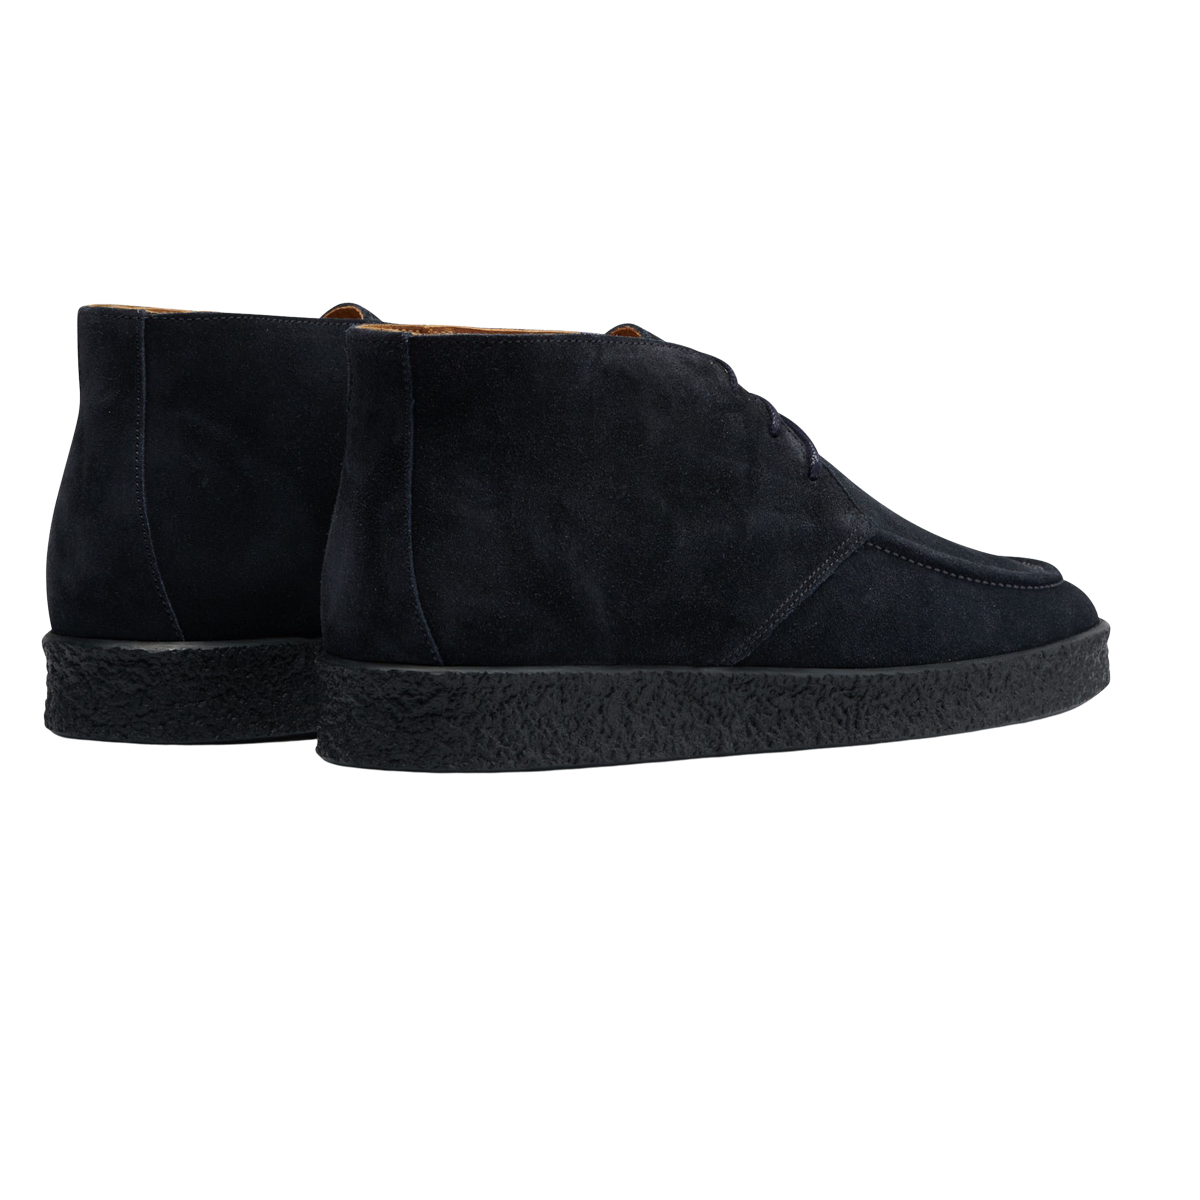 C.QP Navy Blue Suede Leather Plana Boots Back